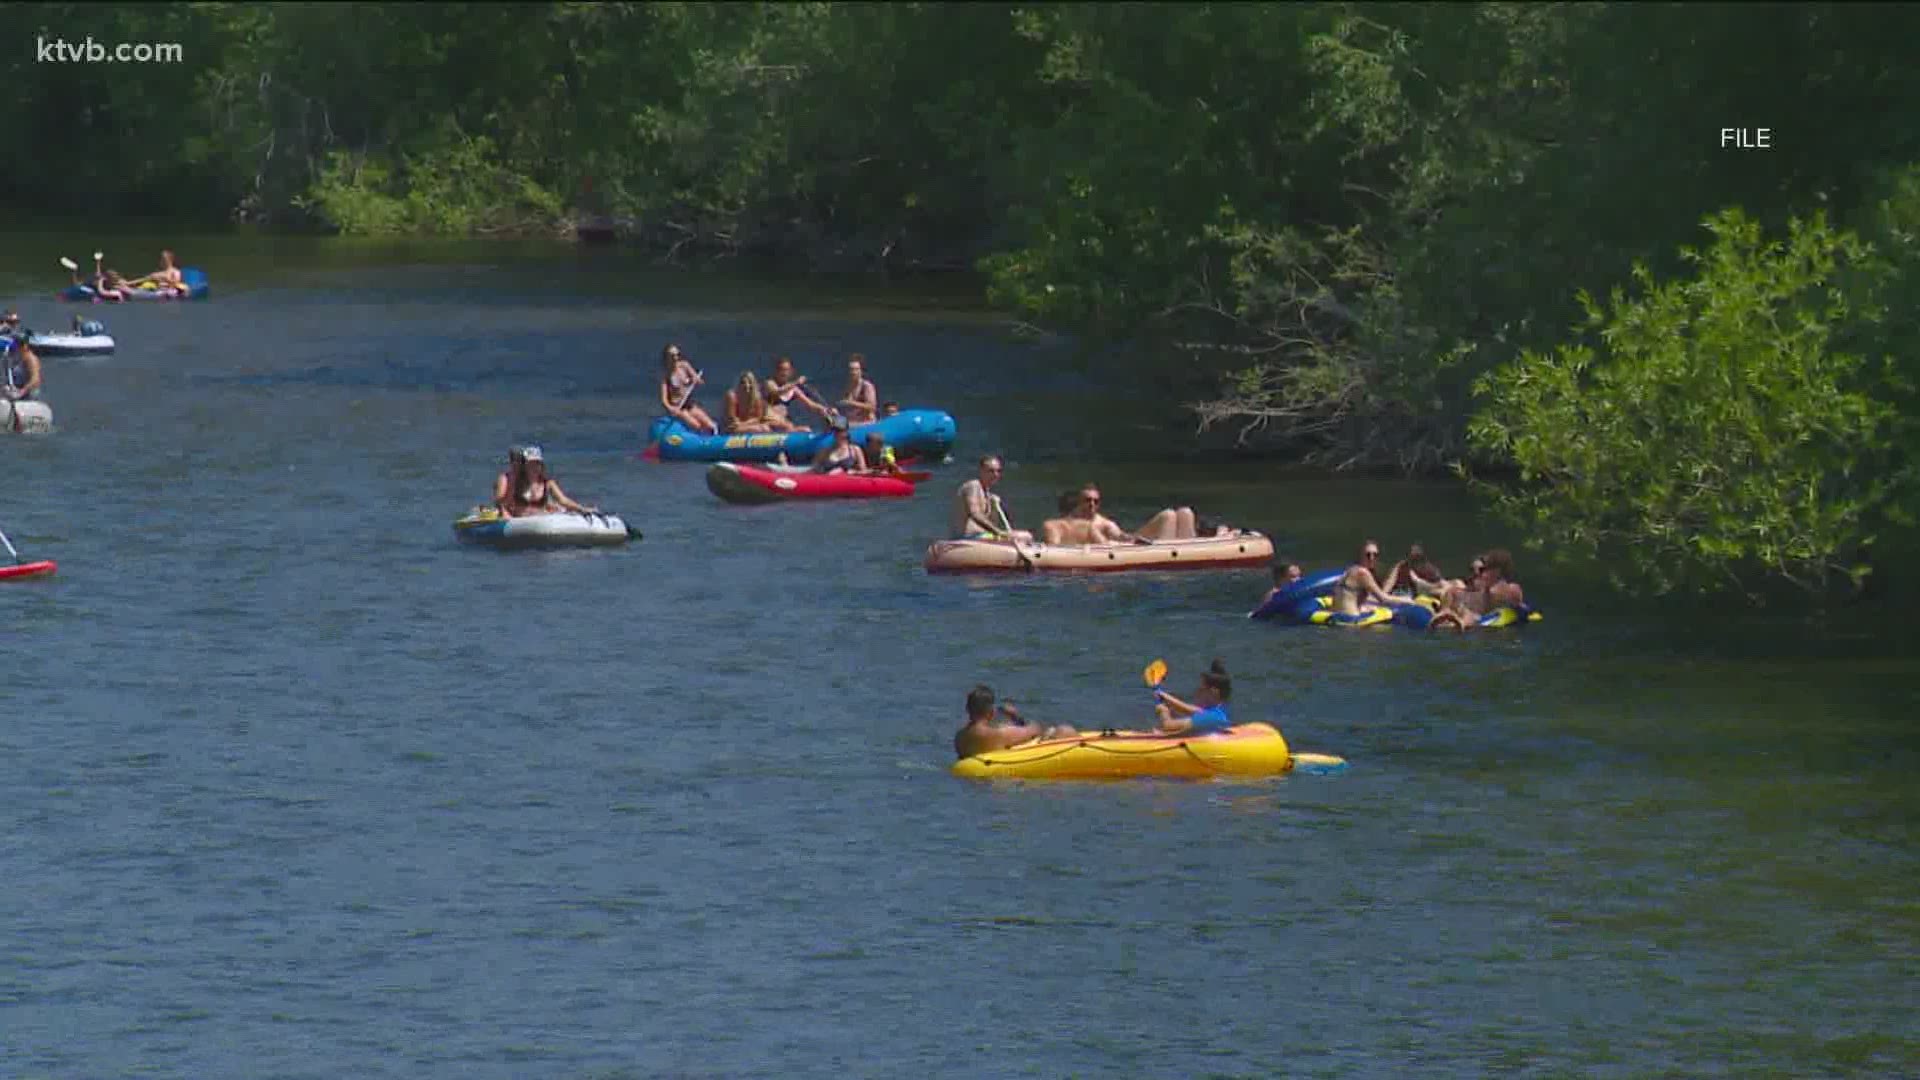 Tube and raft rentals at Barber Park are not available yet.